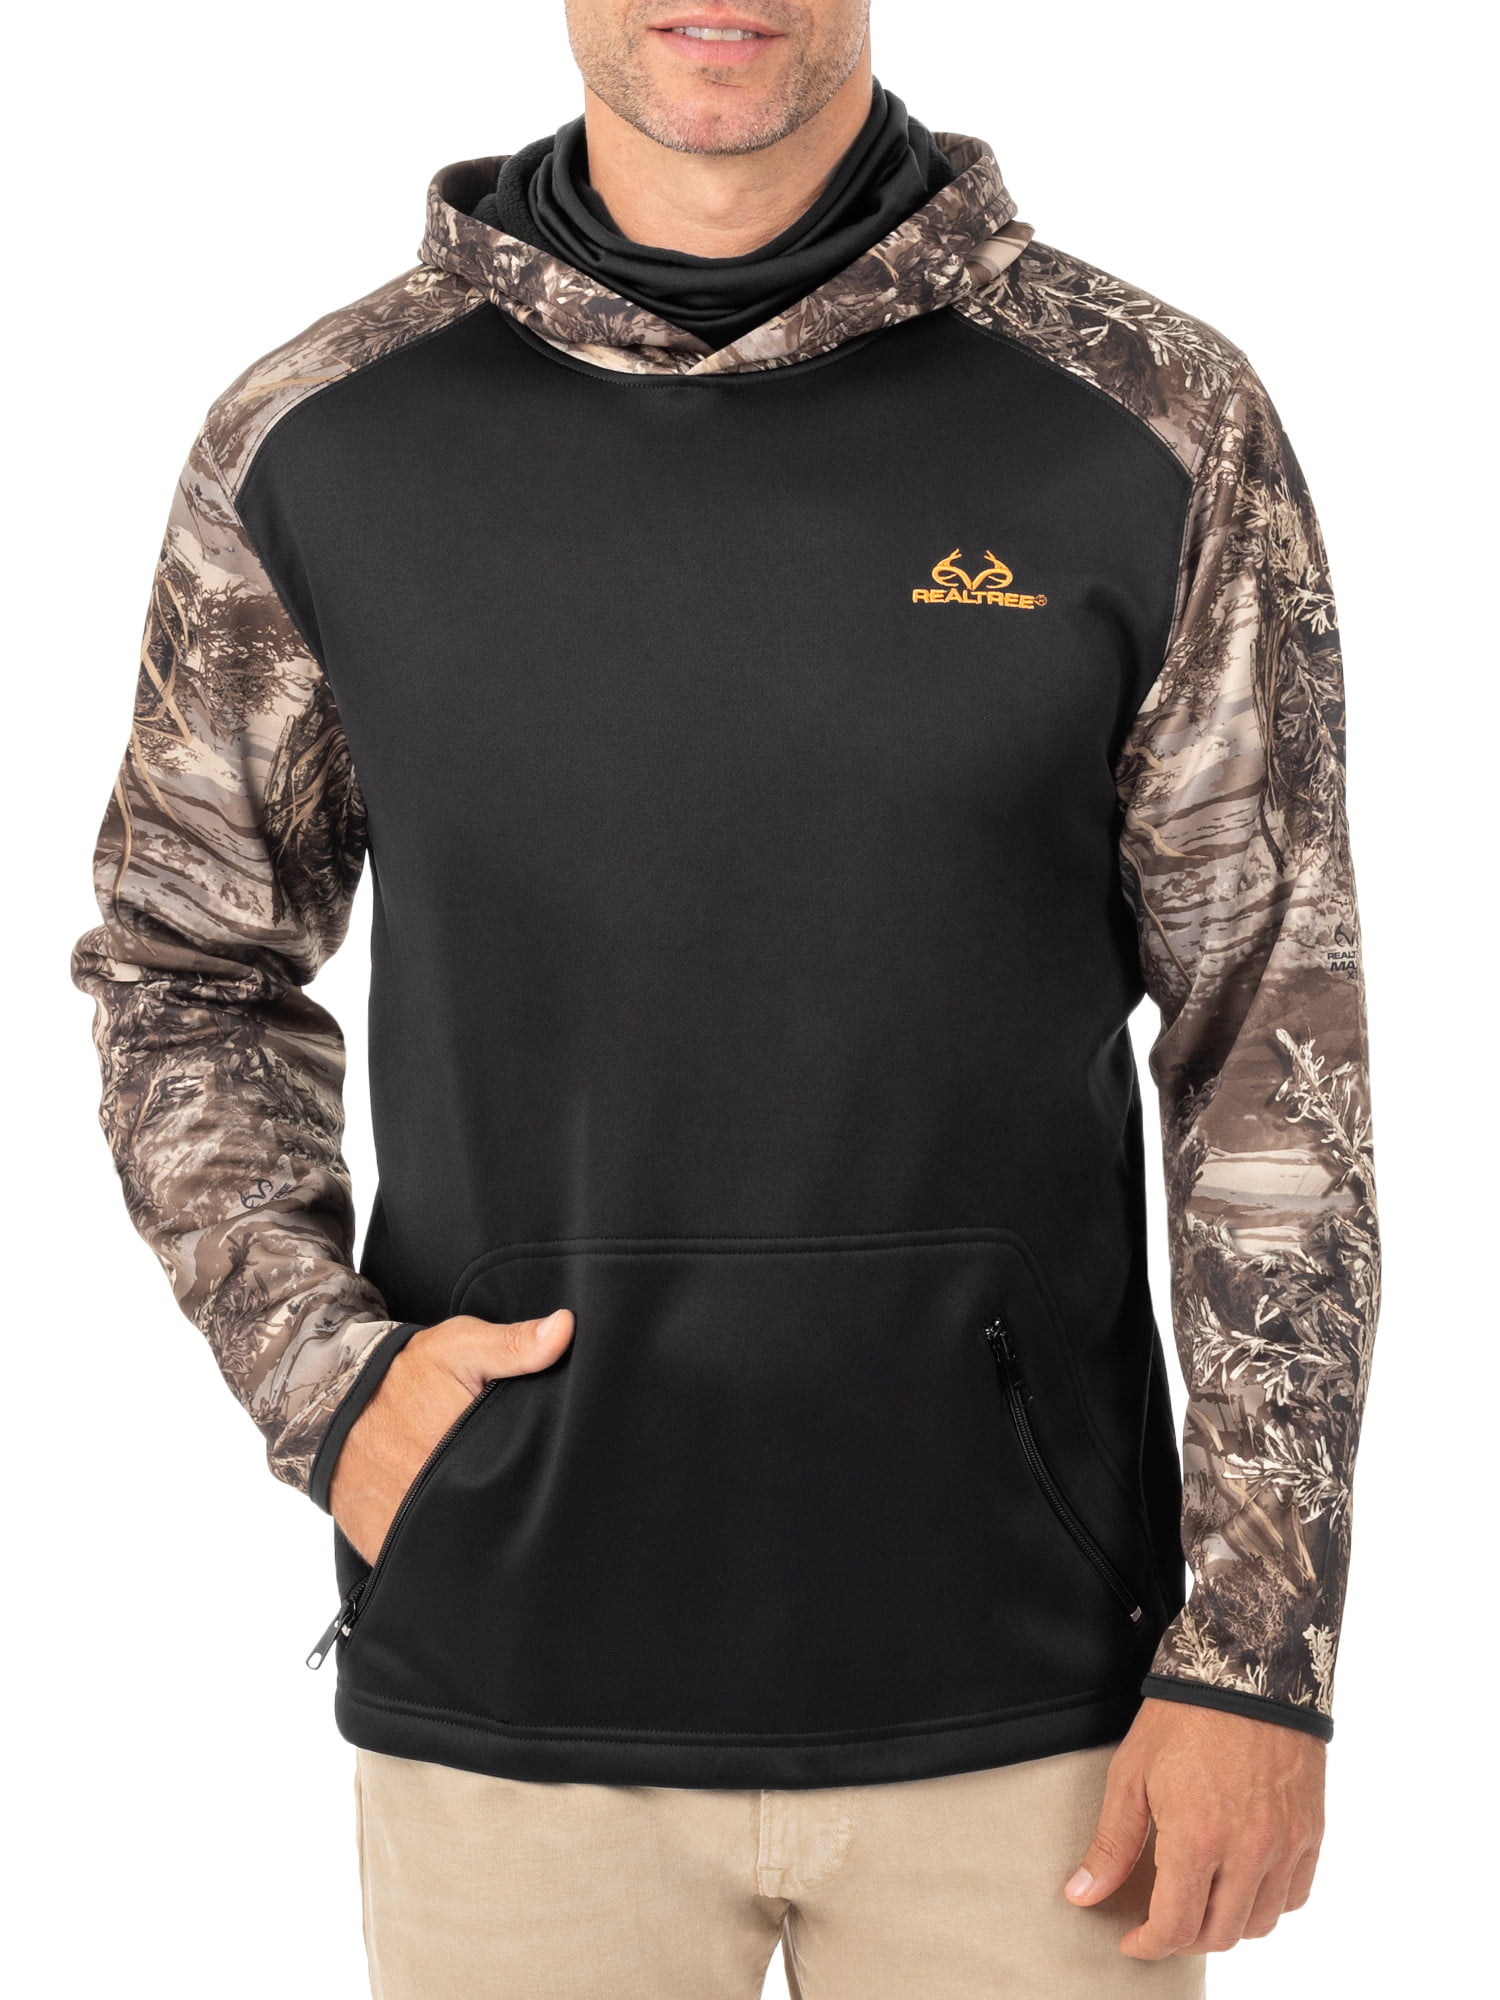 Mossy Oak and Realtree Men’s Performance Fleece Hoodie with Gaiter ...